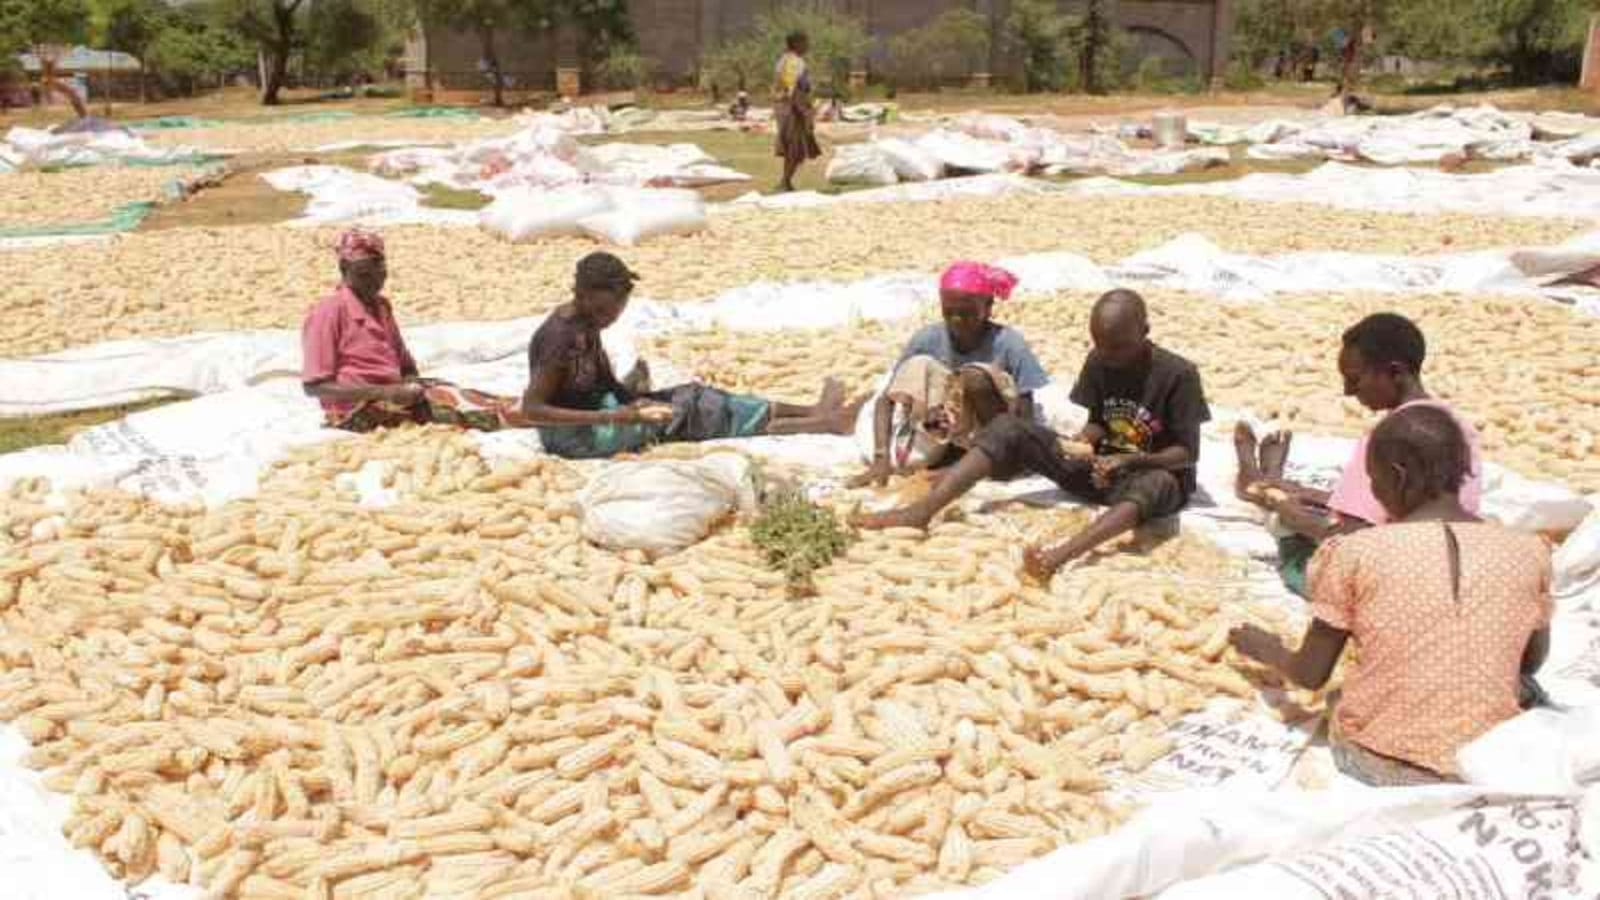 Malawian maize prices ease as harvesting kicks off, rice farmers call for structured markets